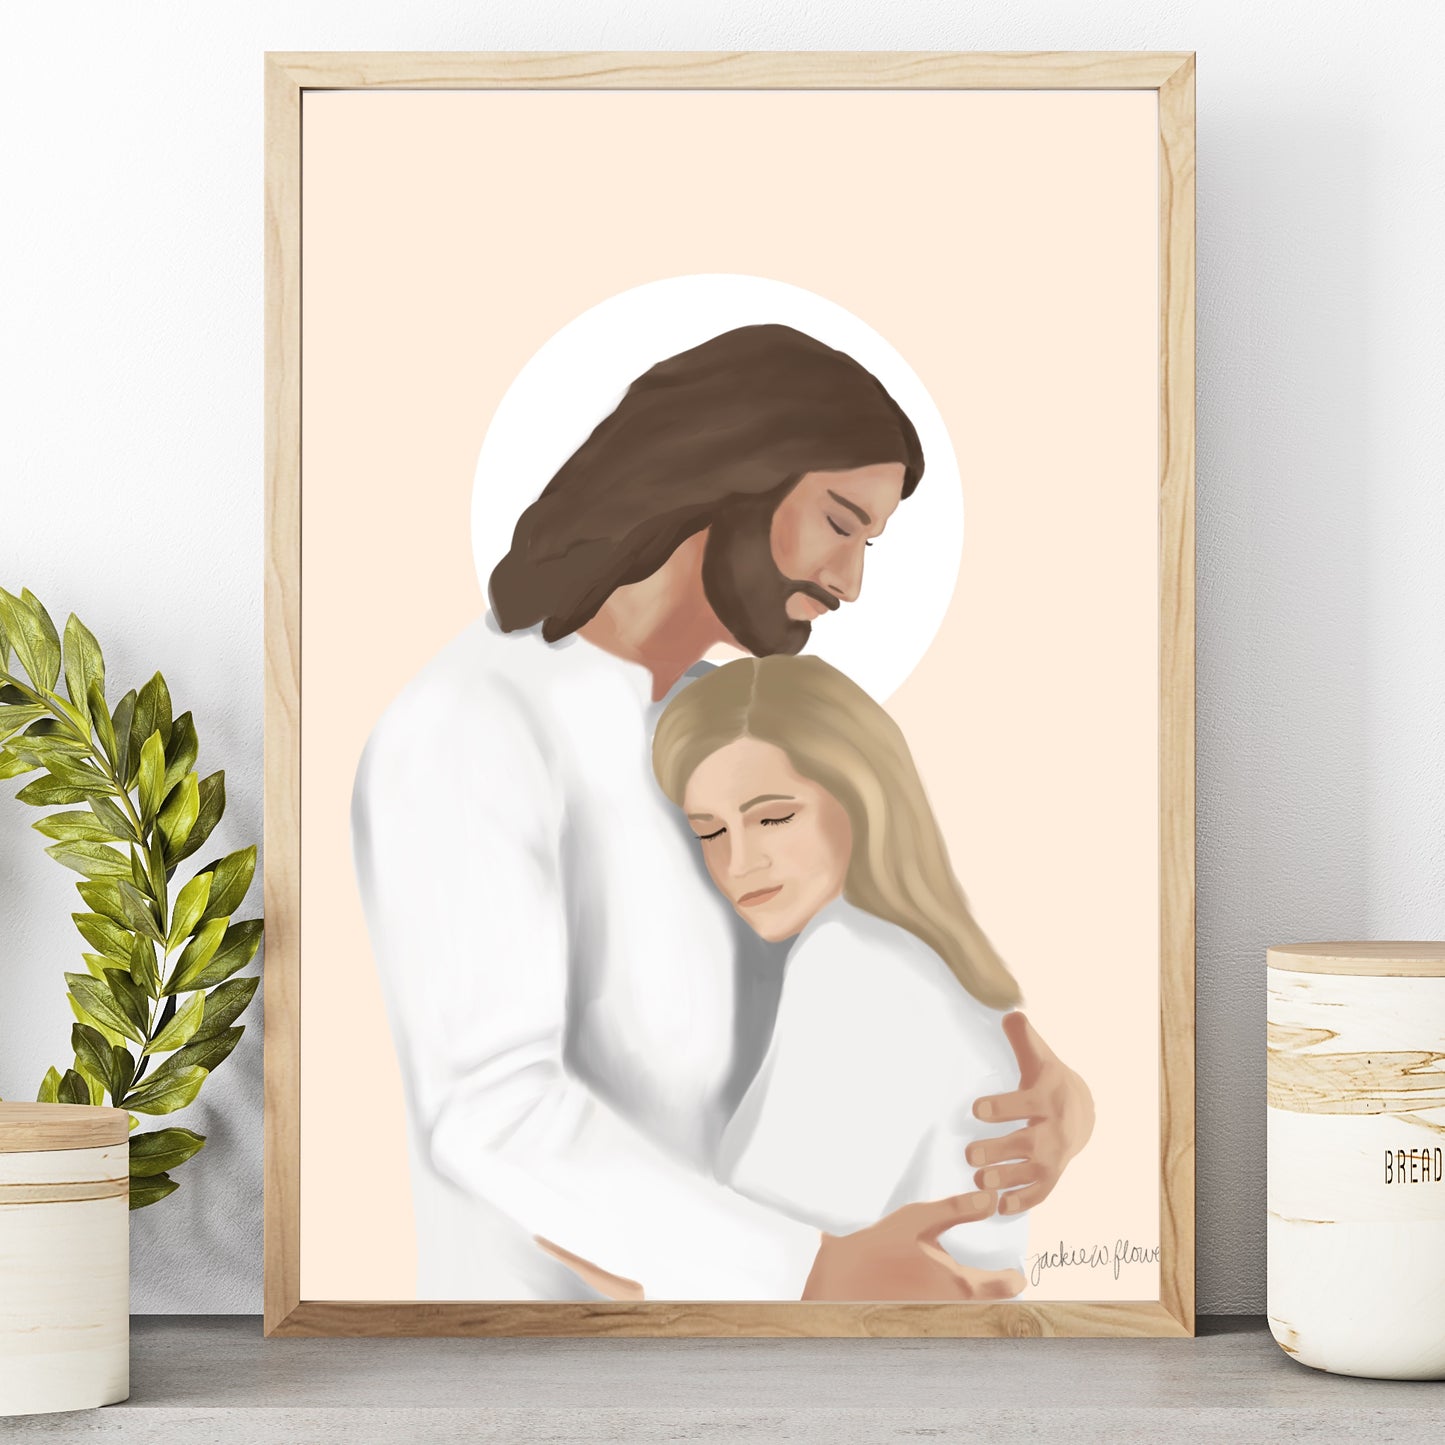 Be Not Troubled - Jesus Hugging Woman